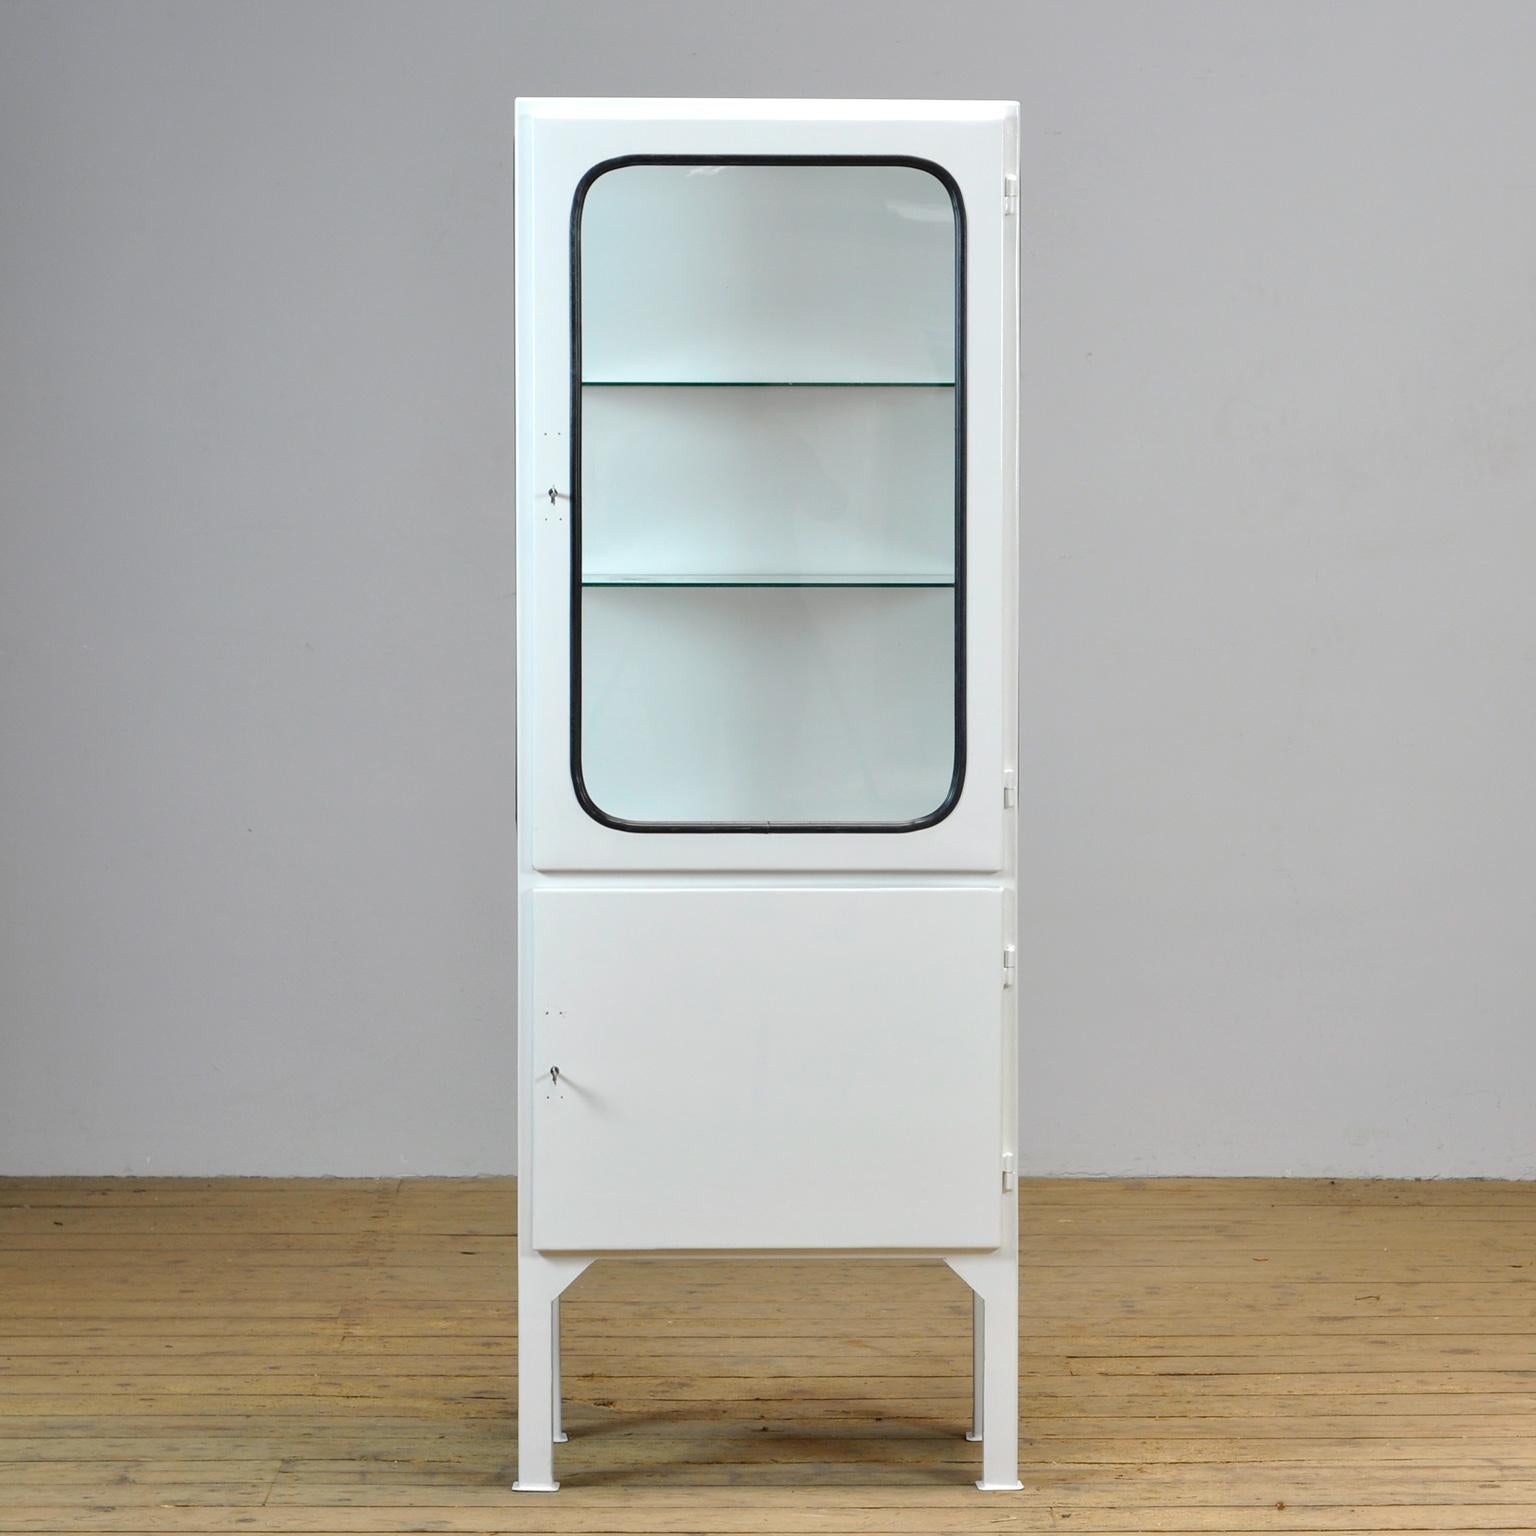 This medical cabinet was designed in the 1970s and was produced circa 1975 in hungary. It is made from iron and glass with new glass shelves. The glass is held by a black rubber strip. The cabinet features two adjustable glass shelves and